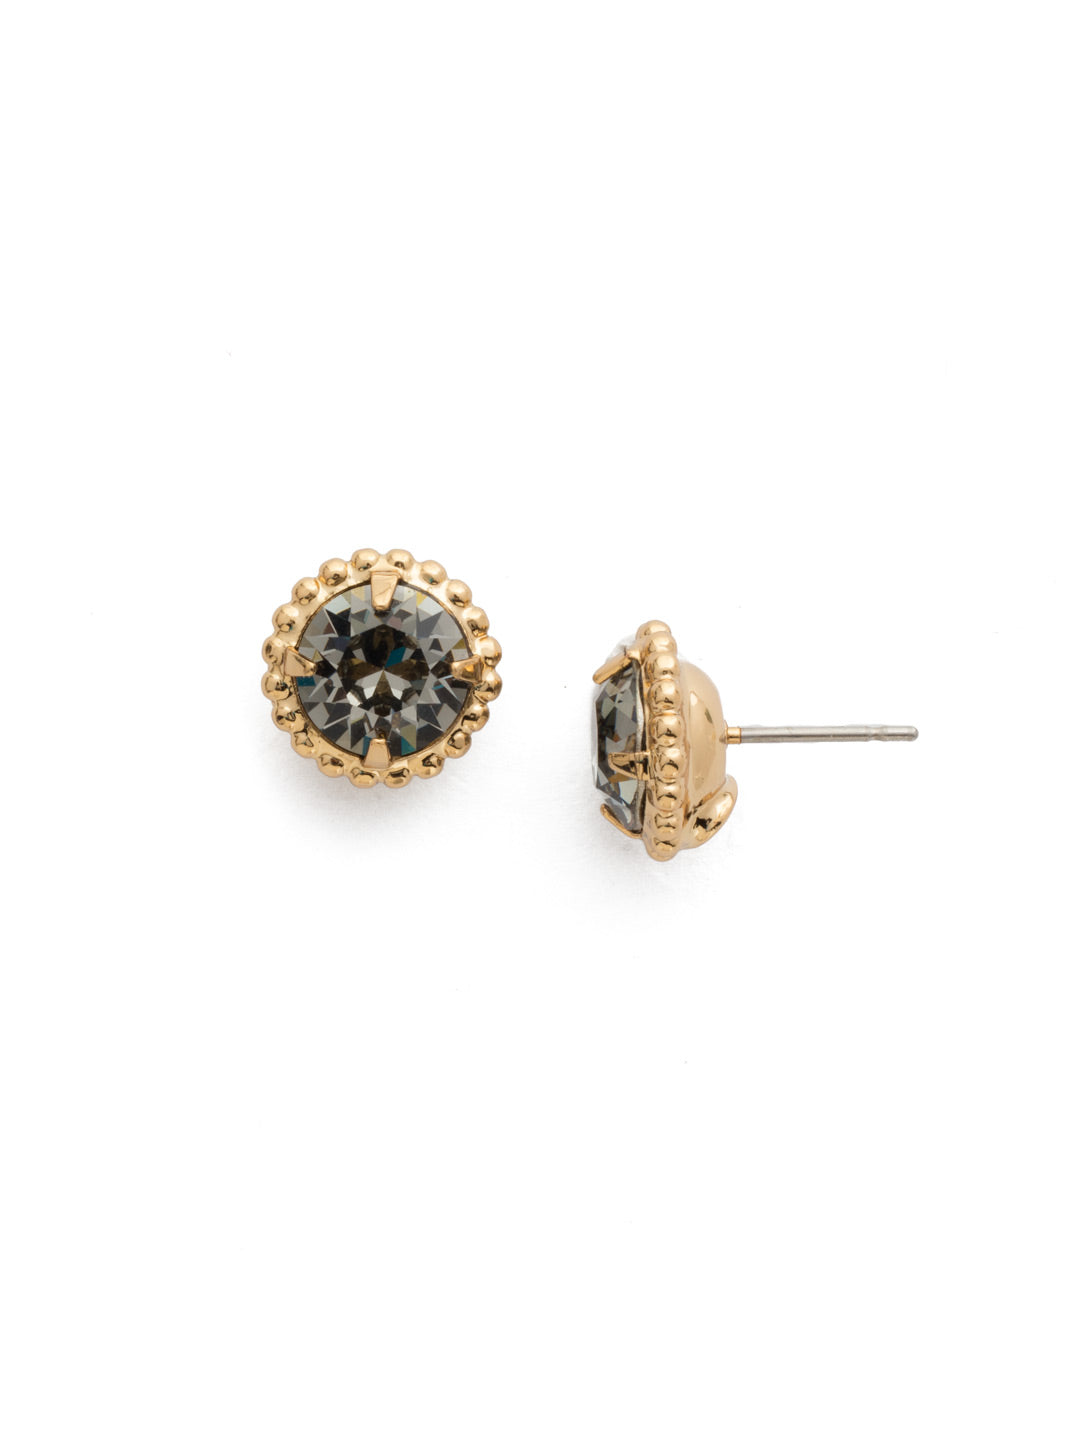 Simplicity Stud Earrings - EBY38BGBD - <p>A timeless classic, the Simplicity Stud Earrings feature round cut crystals in a variety of colors; accented with a halo of metal beaded detail. Need help picking a stud? <a href="https://www.sorrelli.com/blogs/sisterhood/round-stud-earrings-101-a-rundown-of-sizes-styles-and-sparkle">Check out our size guide!</a> From Sorrelli's Black Diamond collection in our Bright Gold-tone finish.</p>